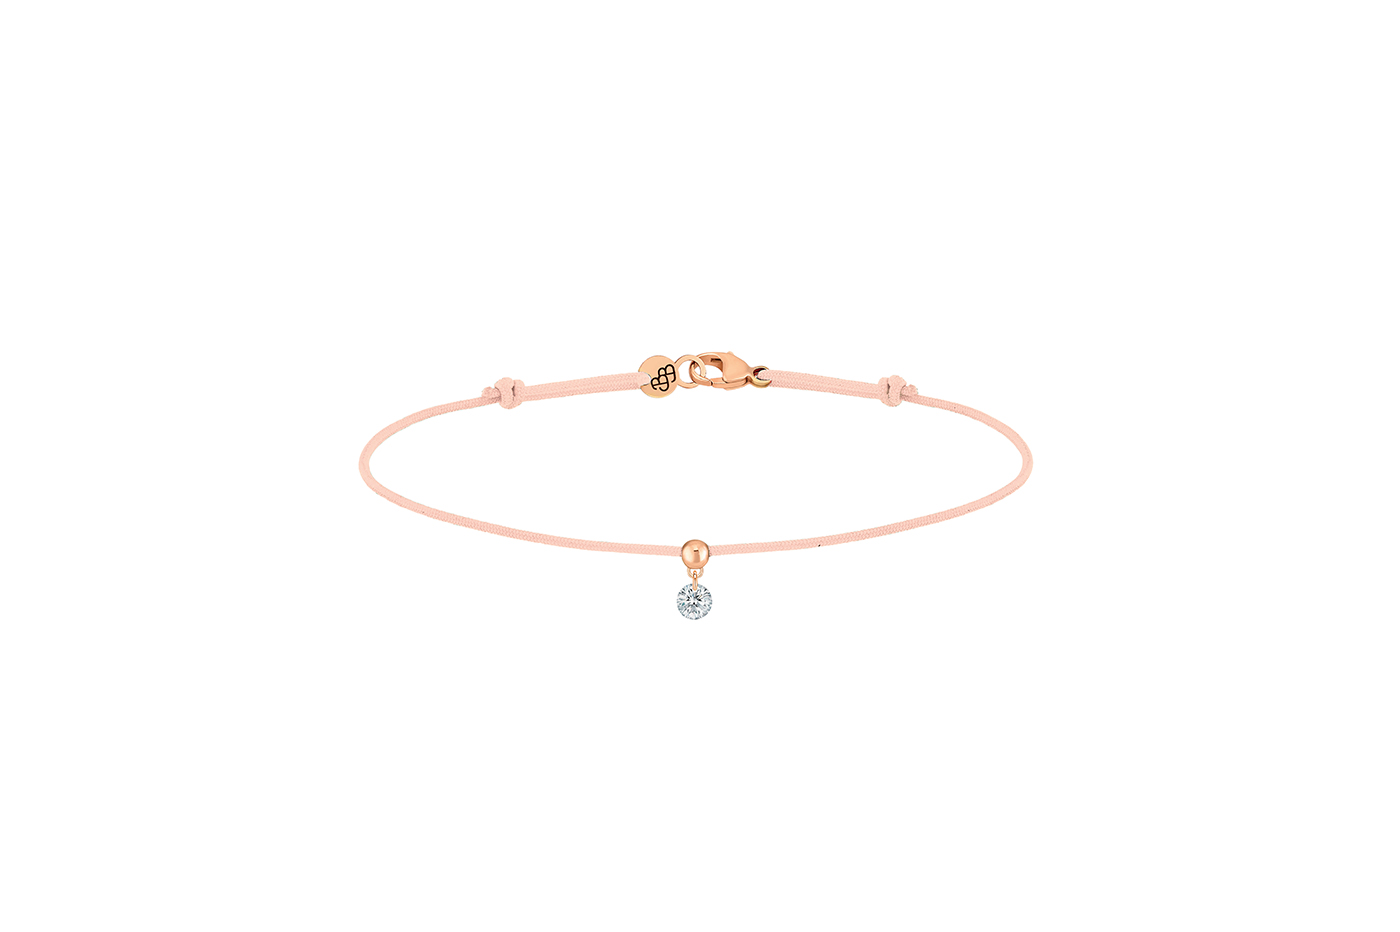 Bracelet BB, diamant GSI, 0,10 ct approx., cordon NUDE, or 18KT, 0,35gr. Collection BB Référence :  BC0002PGDINU -1